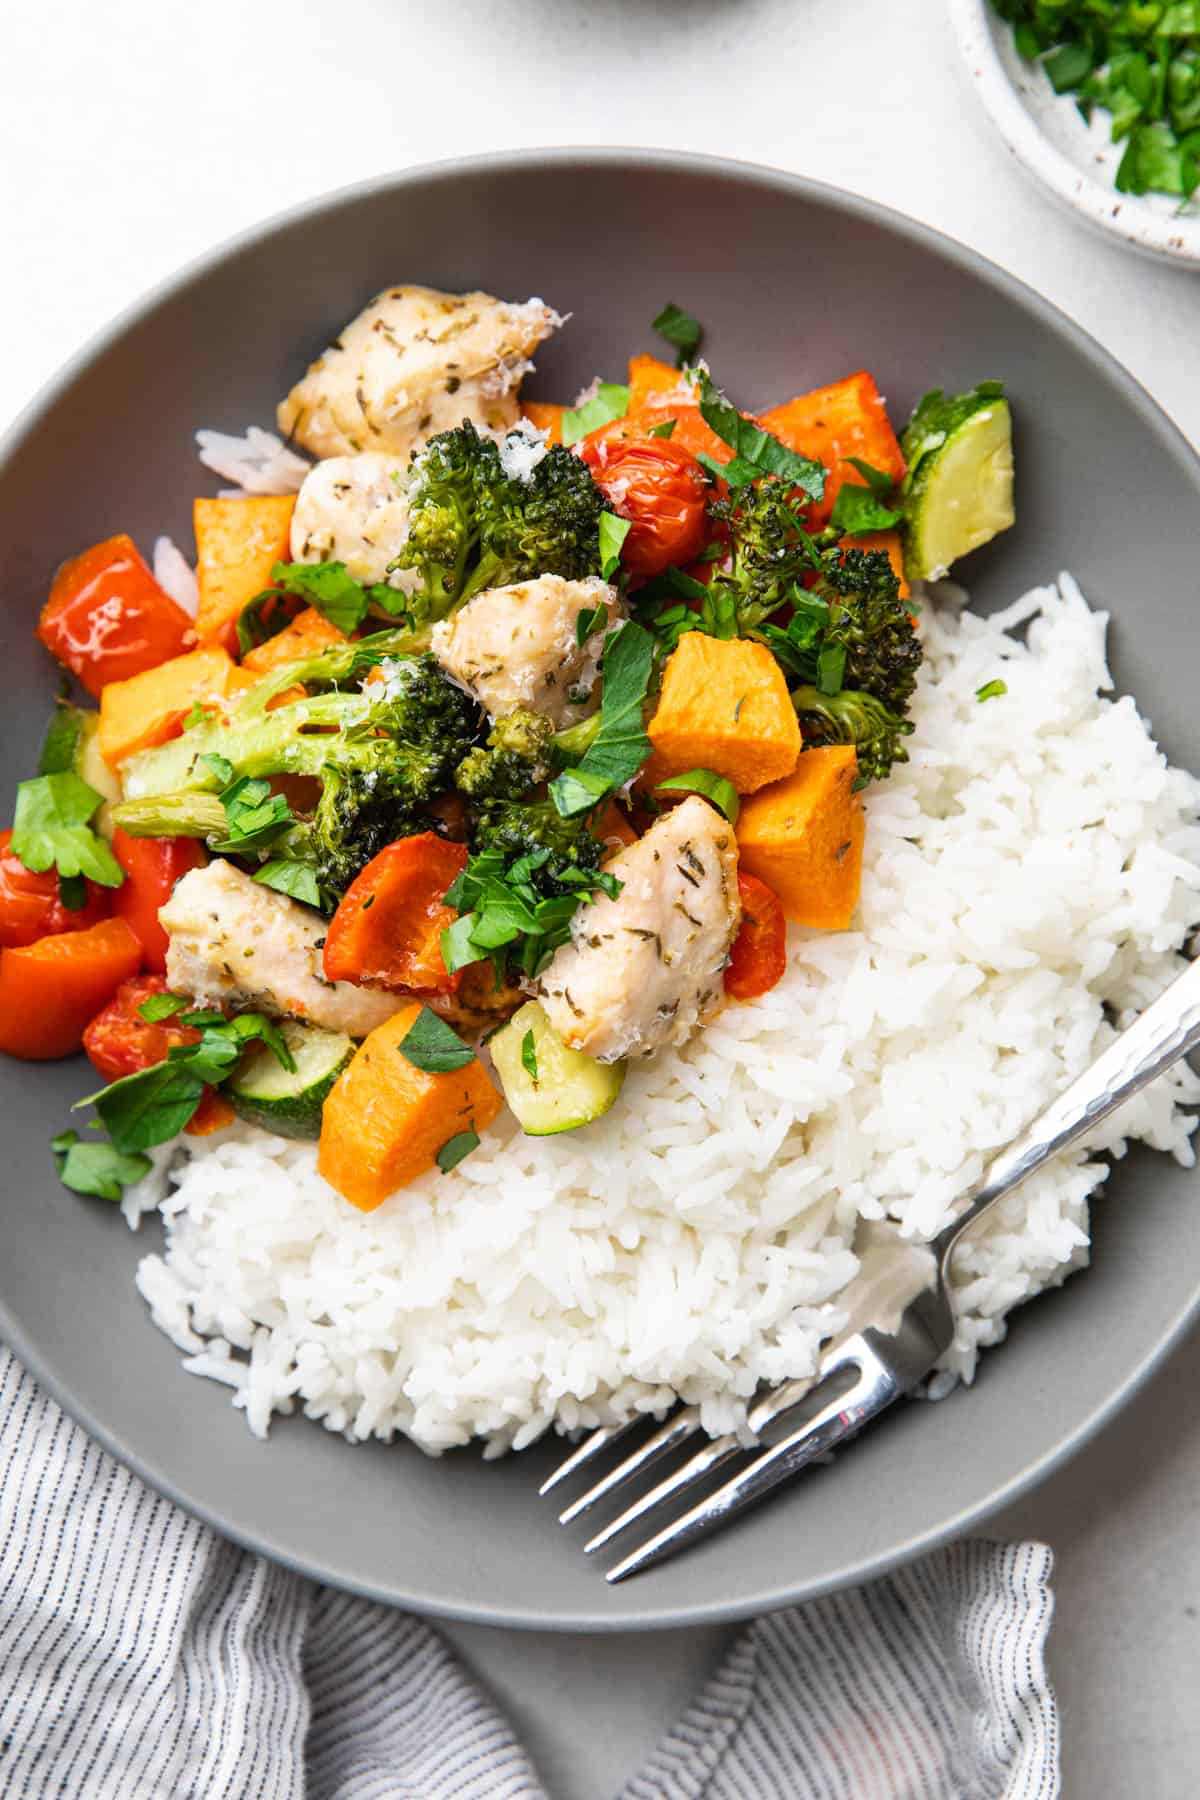 Baked diced chicken breast, sweet potatoes, broccoli, zucchini, bell pepper, and cherry tomatoes with white rice in a bowl.